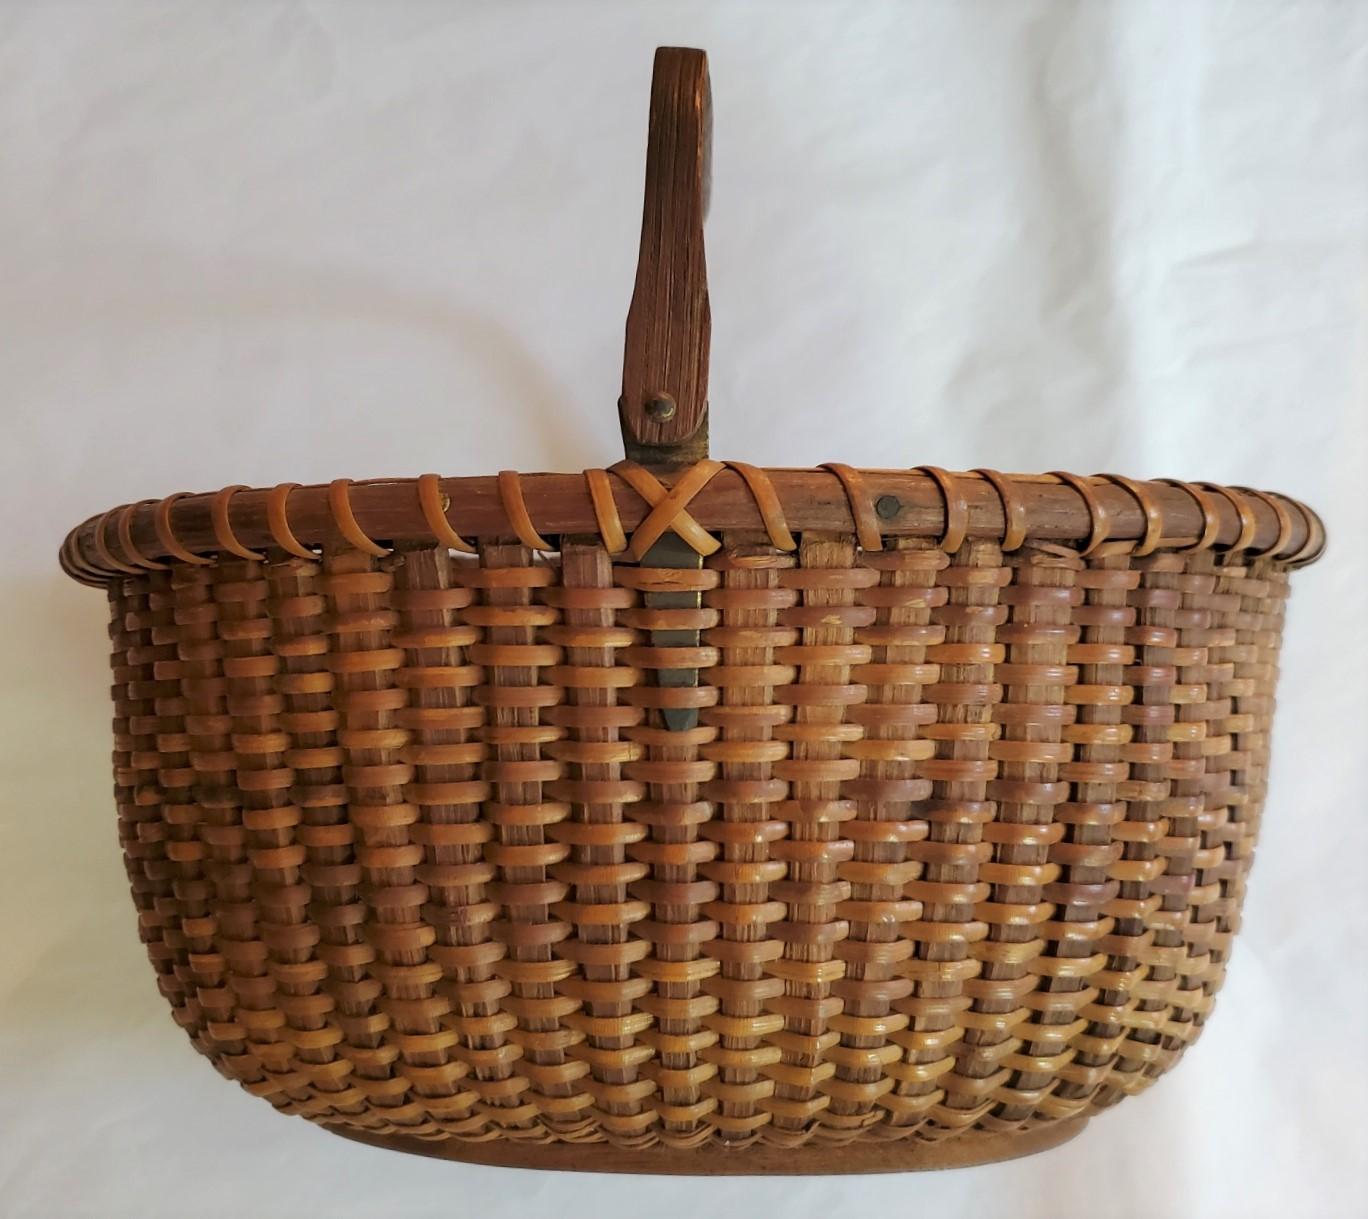 American Early 20th Century Nantucket Oval Basket by A.D. Williams, circa 1920